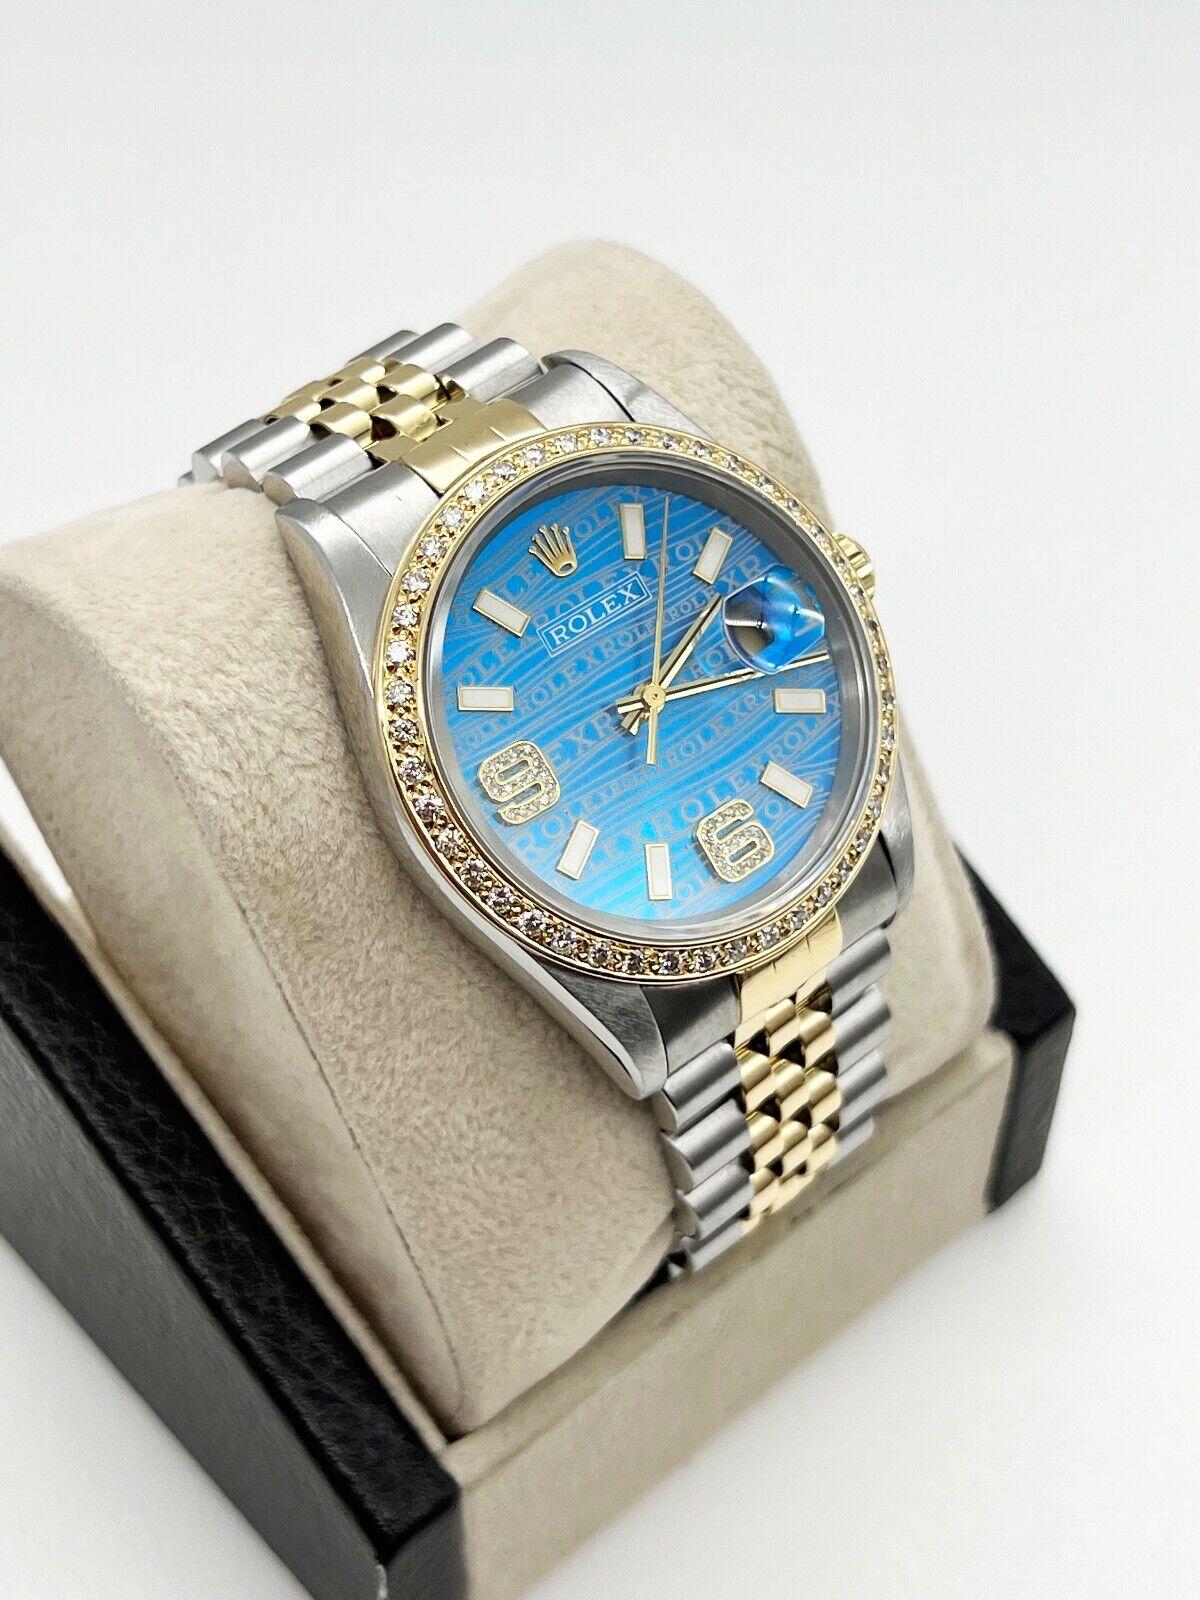 Style Number: 16233

Serial: U784***

Year: 1997

Model: Datejust

Case Material: Stainless Steel

Band: 18K Yellow Gold & Stainless Steel 

Bezel: Custom Diamond Bezel 

Dial: Custom Blue Diamond Dial 

Face: Sapphire Crystal

Case Size: